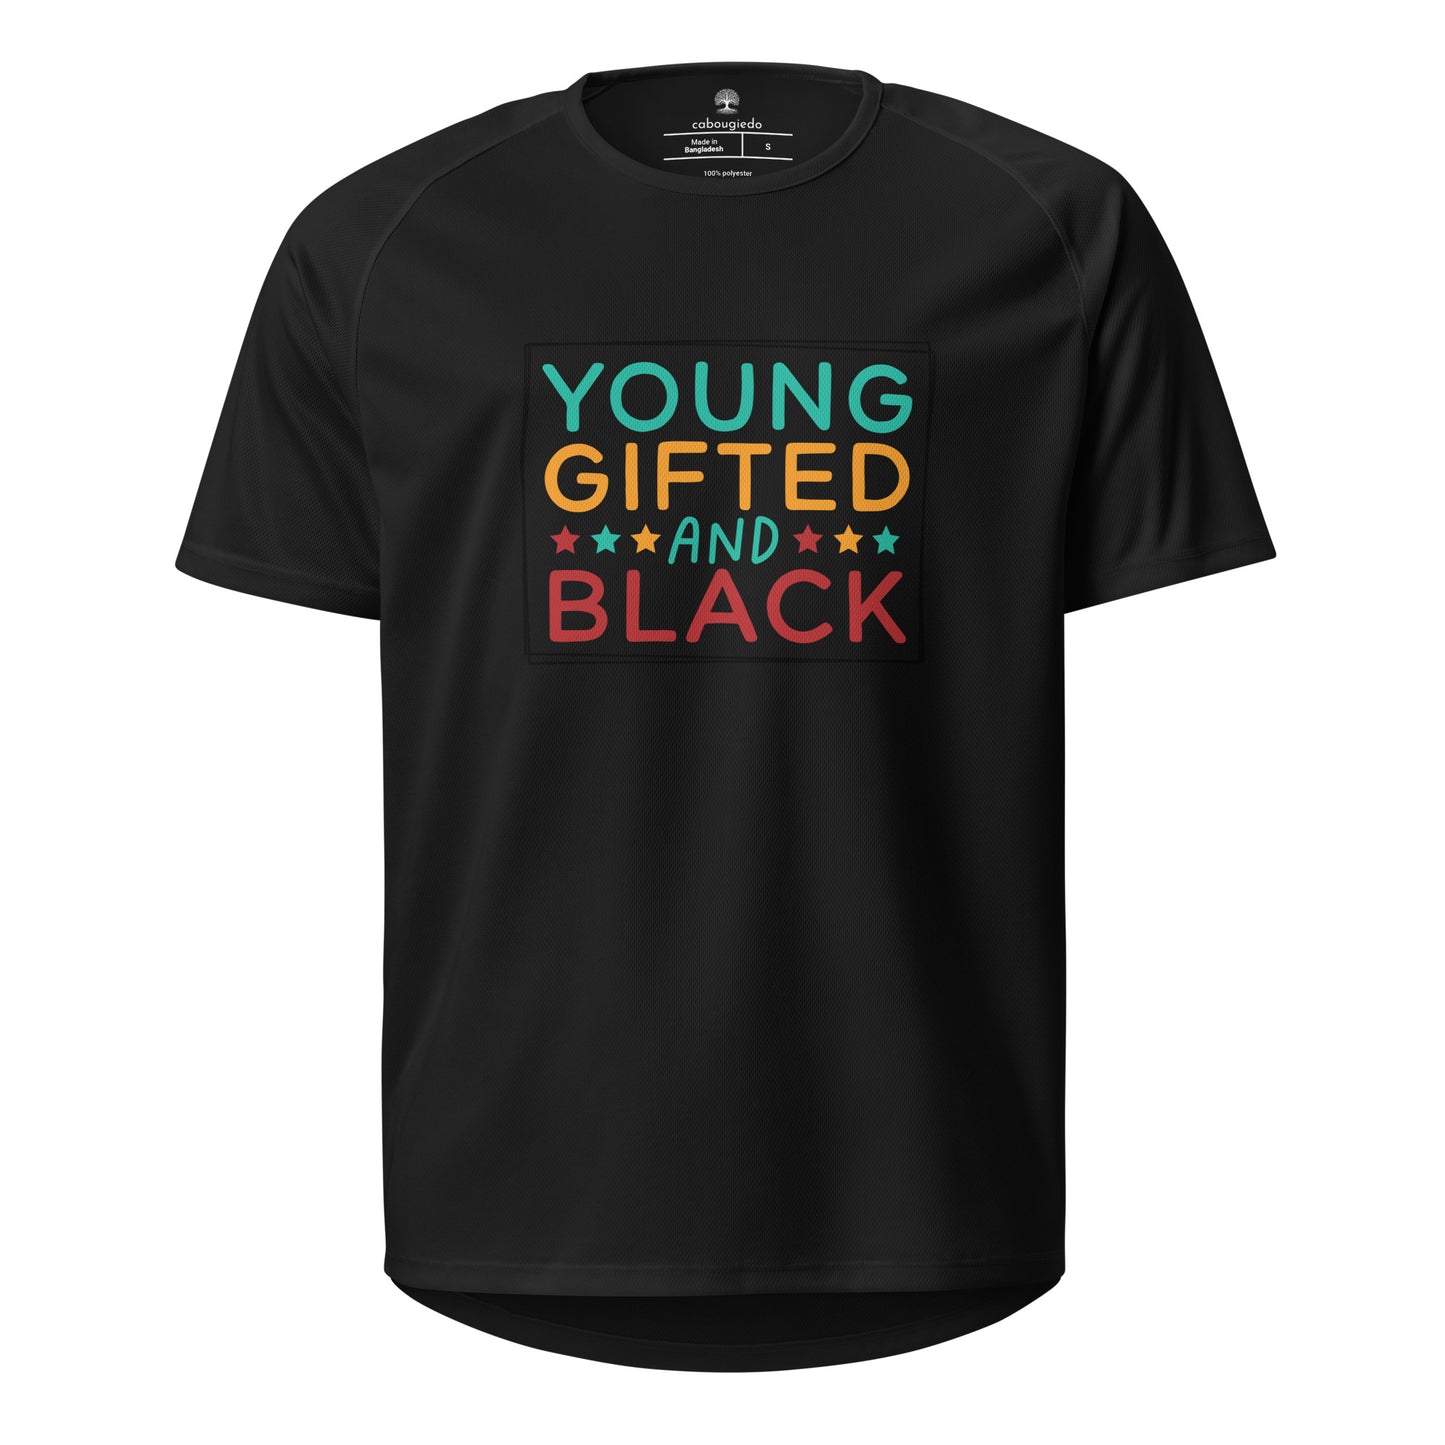 Unisex sports jersey - Young Gifted and Black